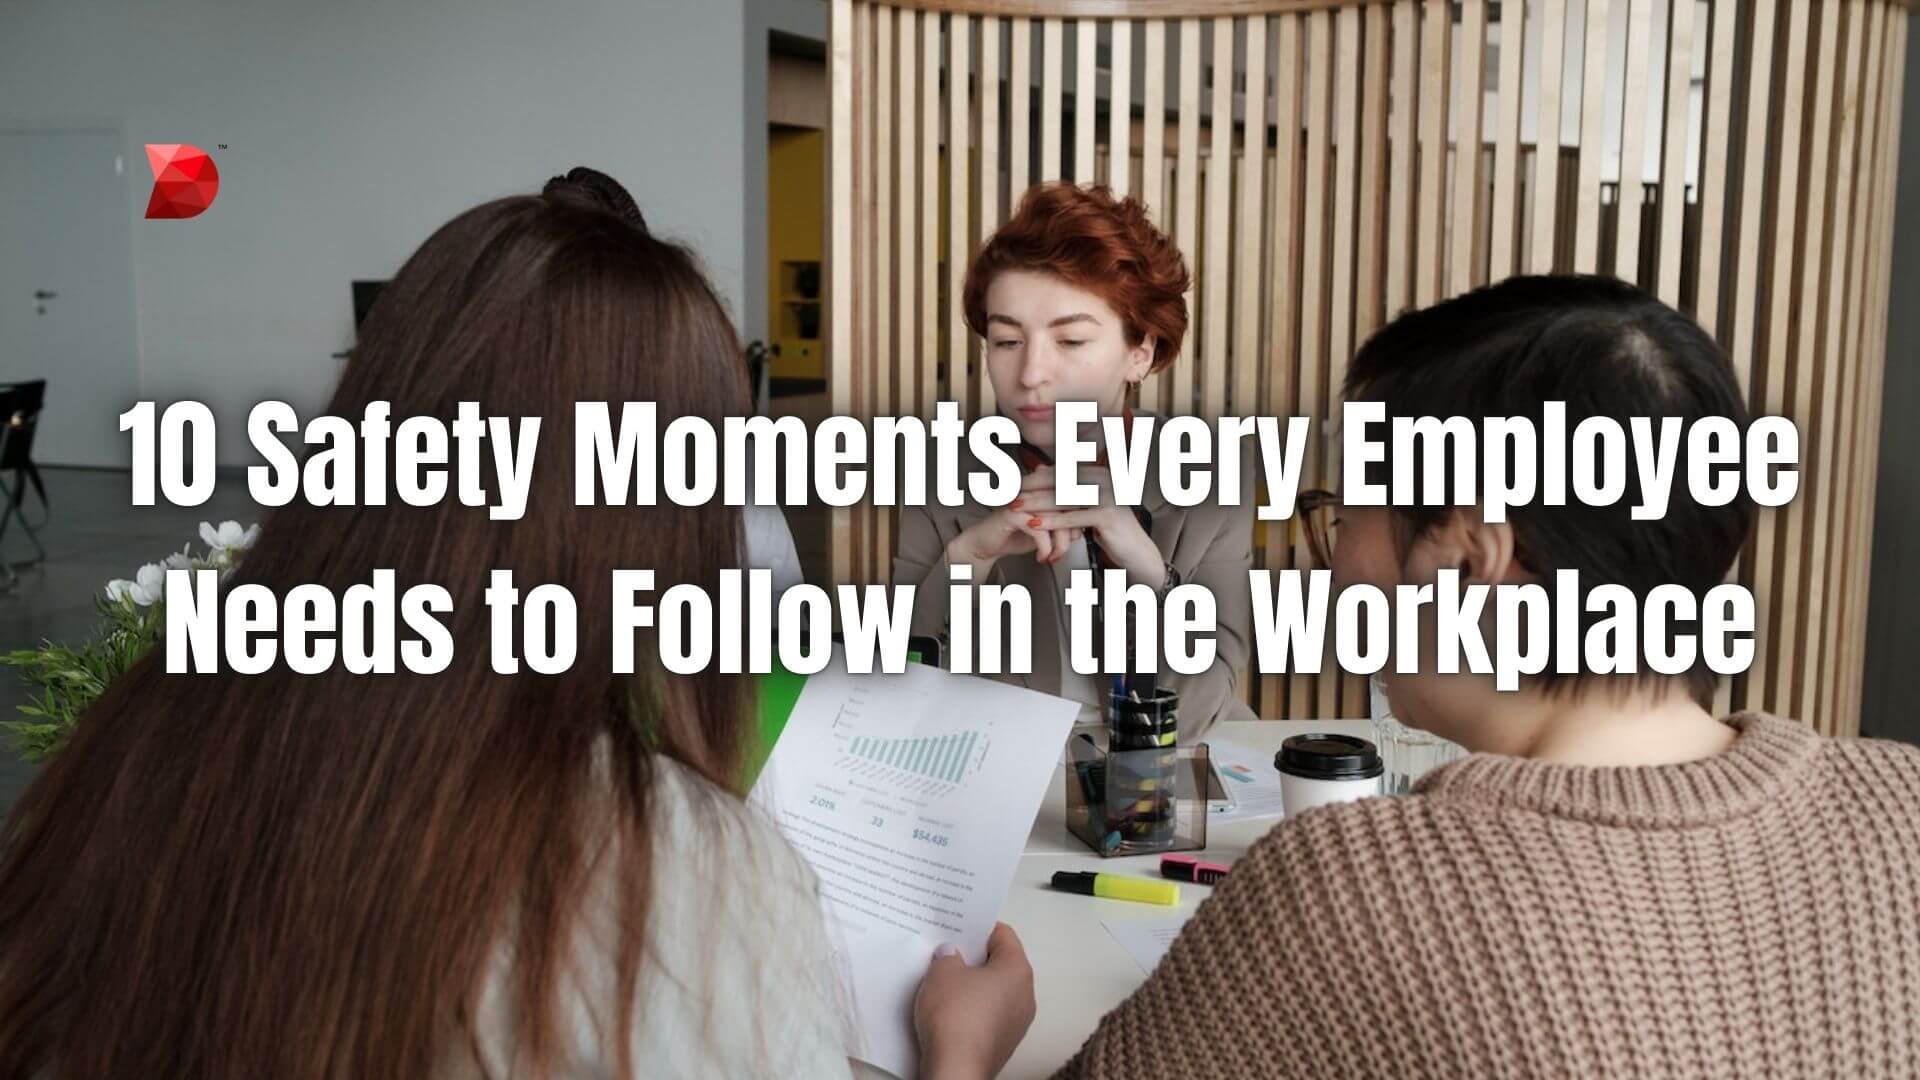 10 Safety Moments Every Employee Needs to Follow in the Workplace